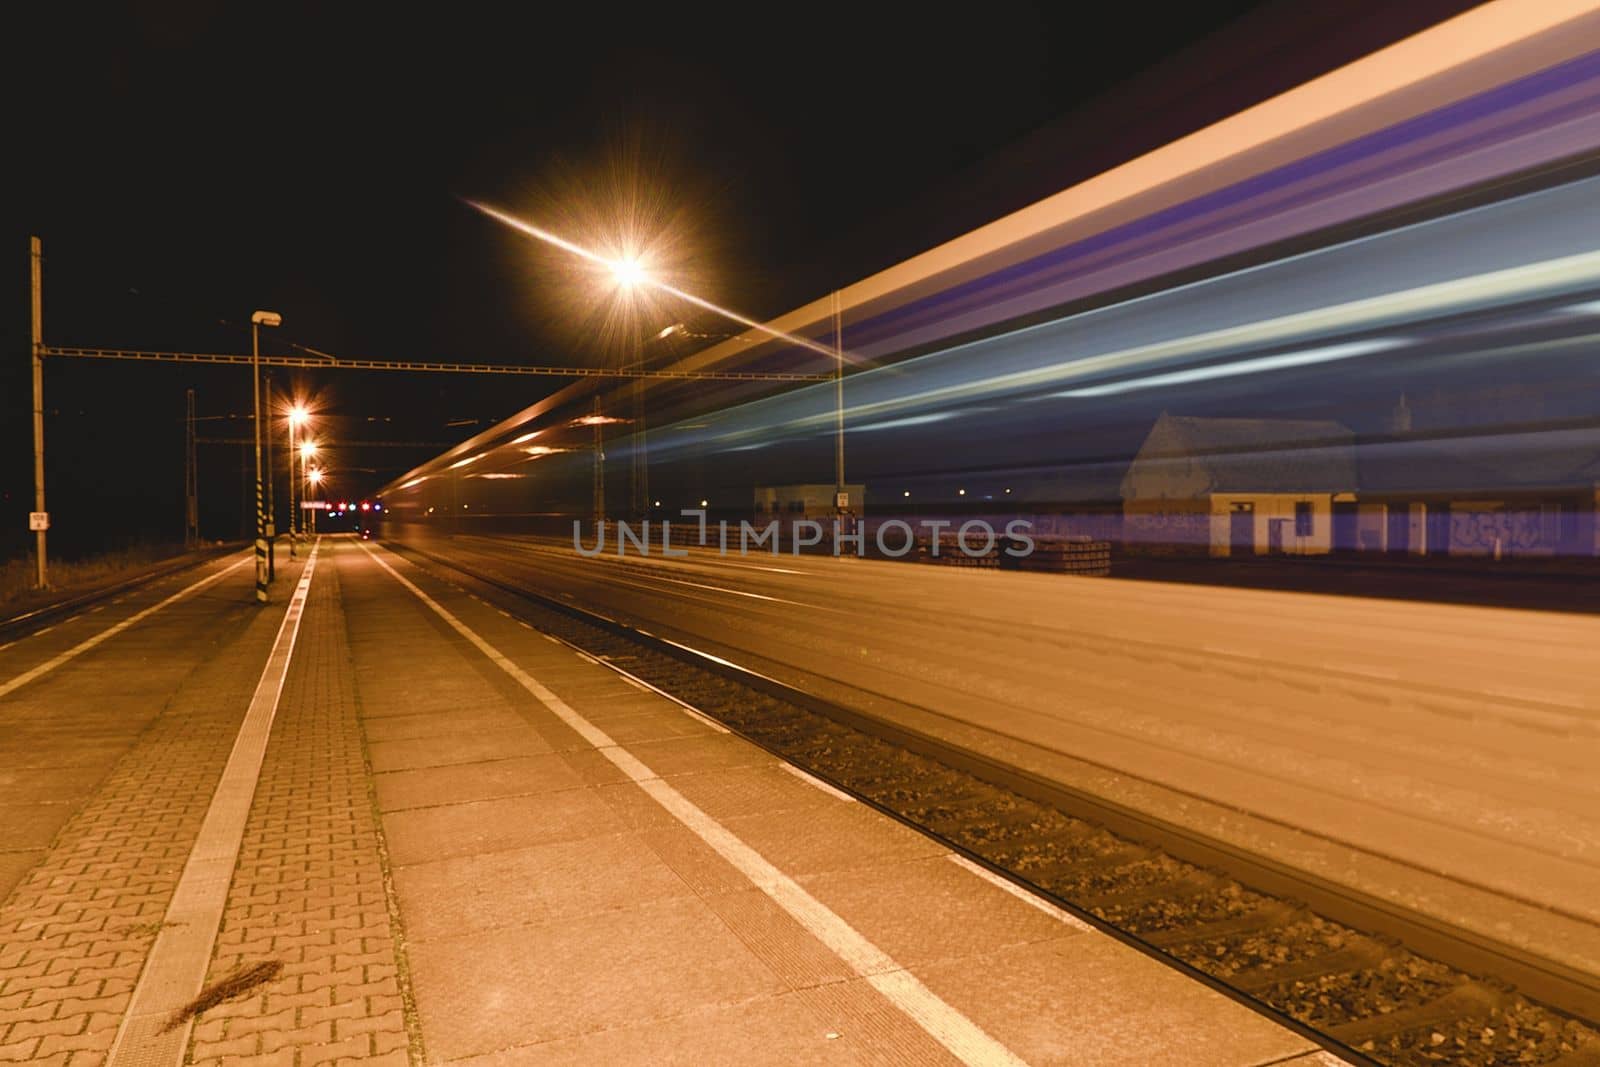 Light trail of the express train in the railway station at the night. Railway platform a the night by roman_nerud